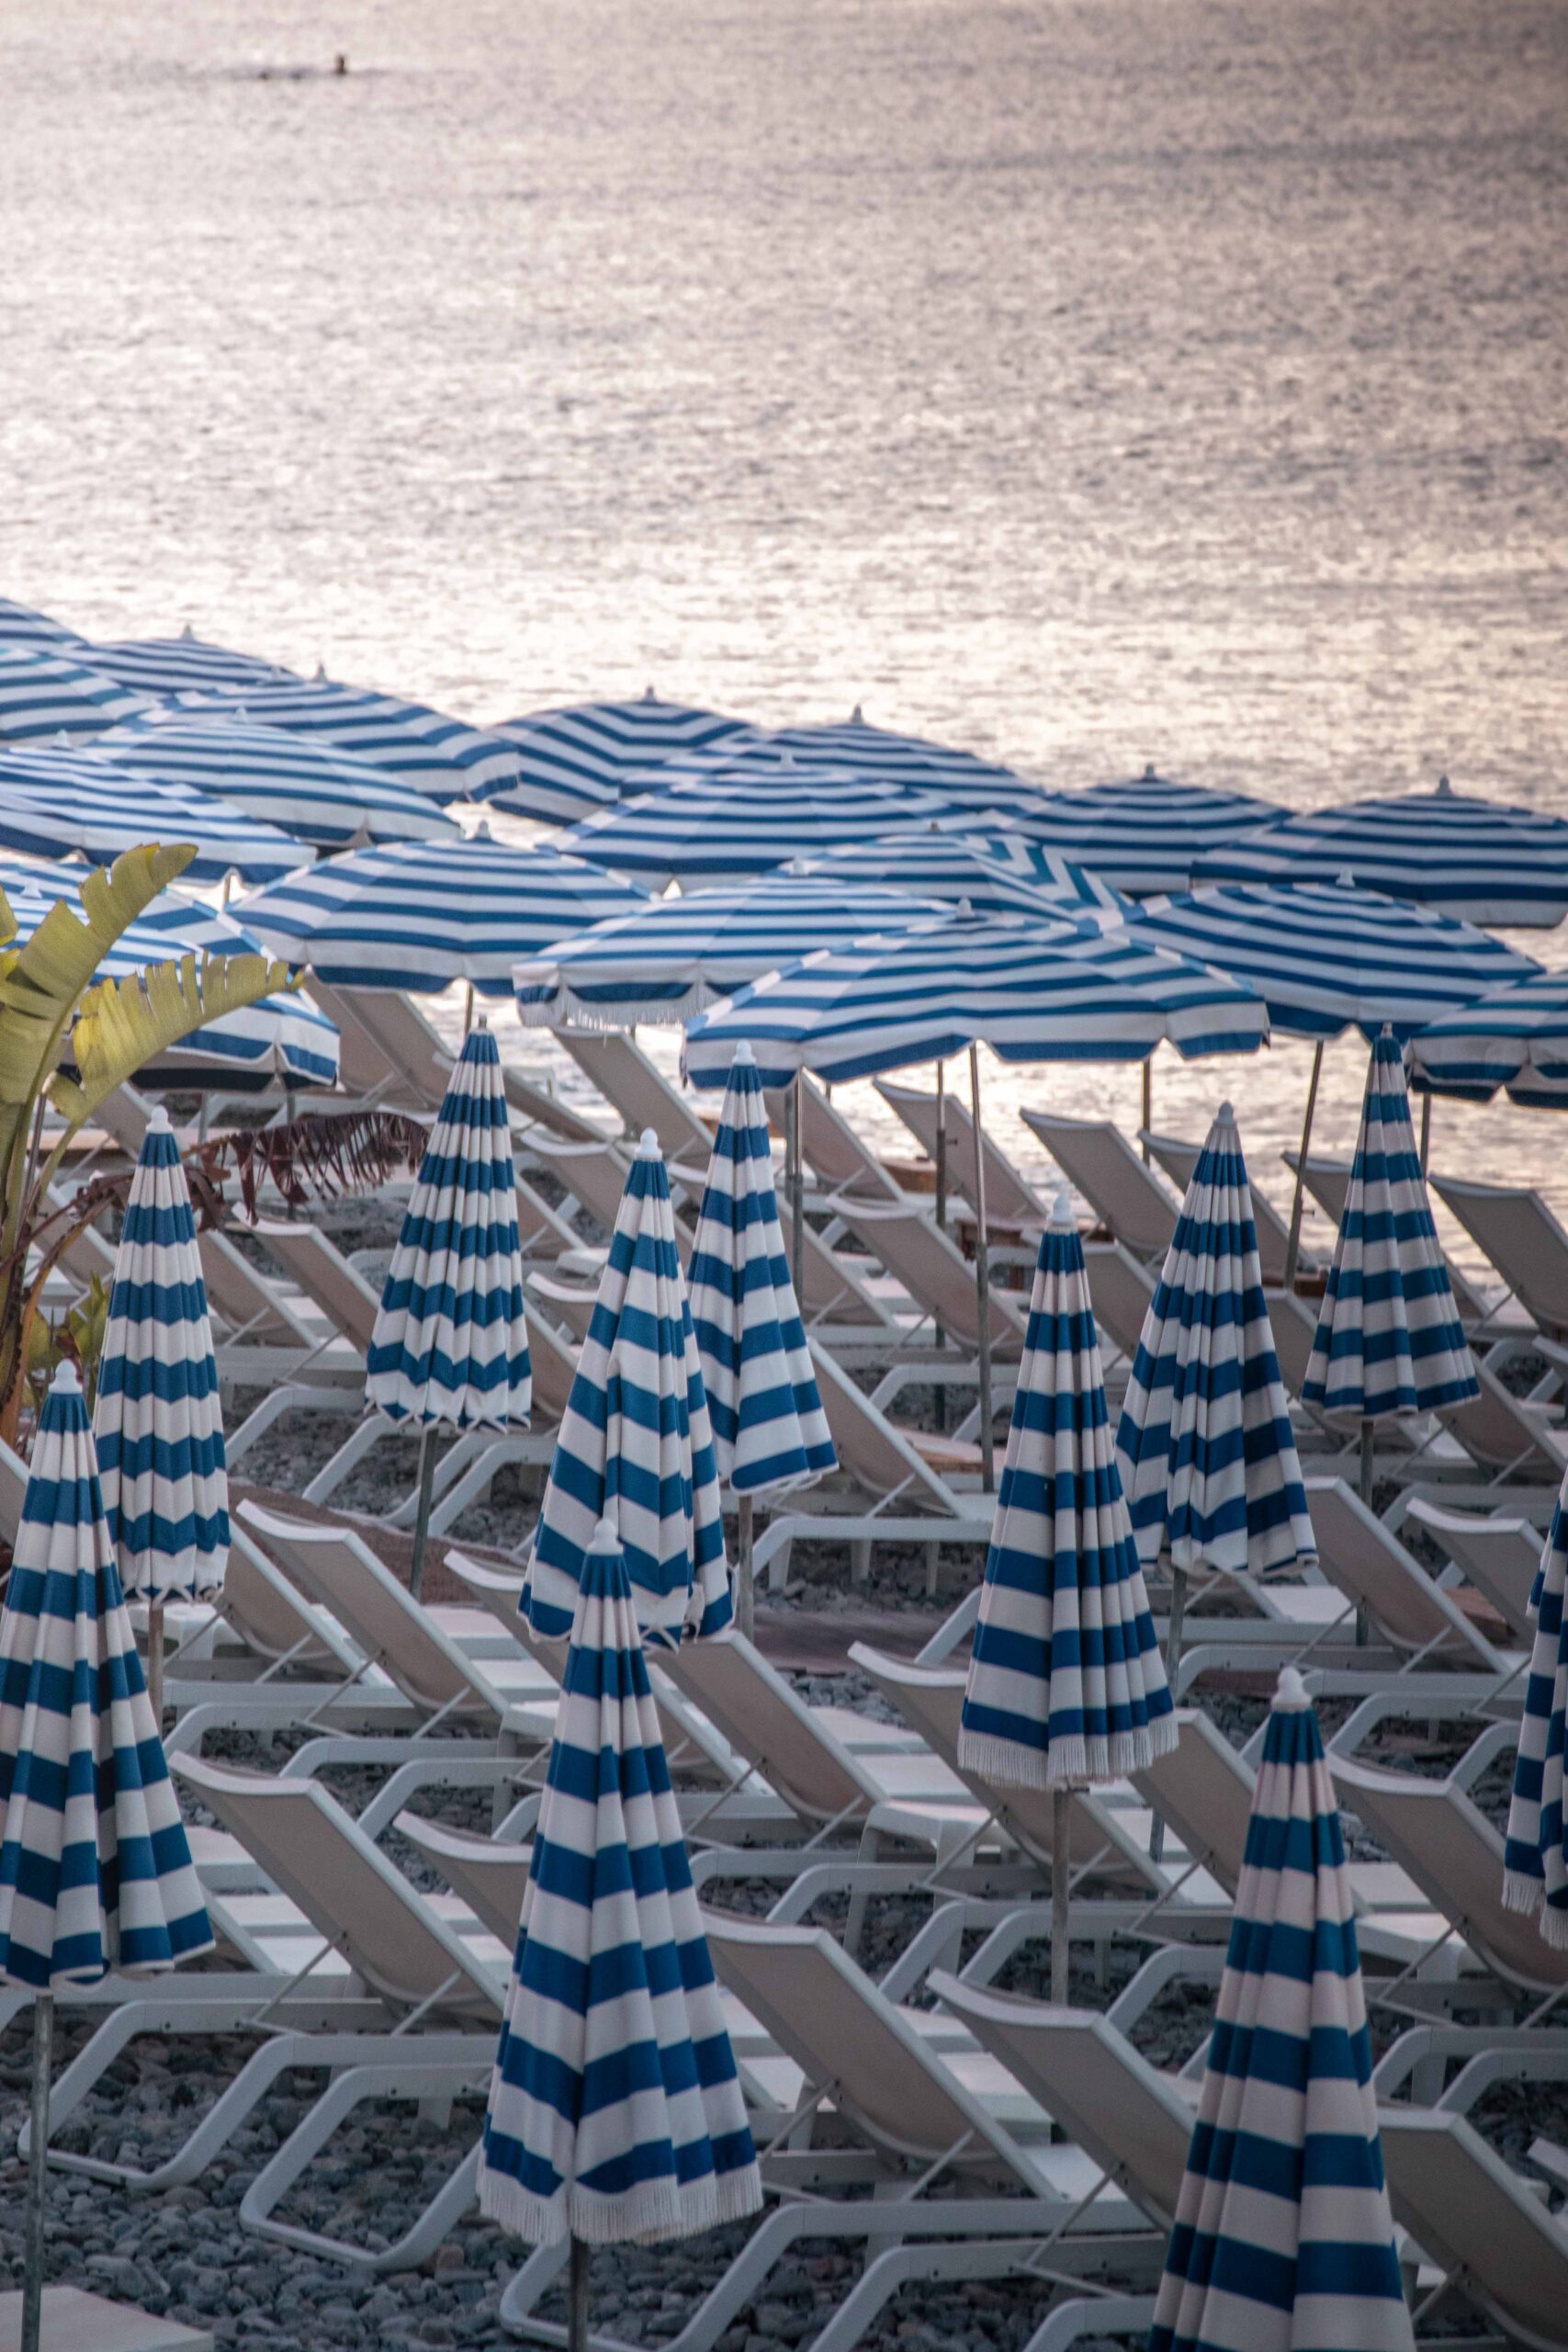 Blue and white beach umbrellas during sunrise at Ruhl plage along the Promenade des Anglais in Nice, France